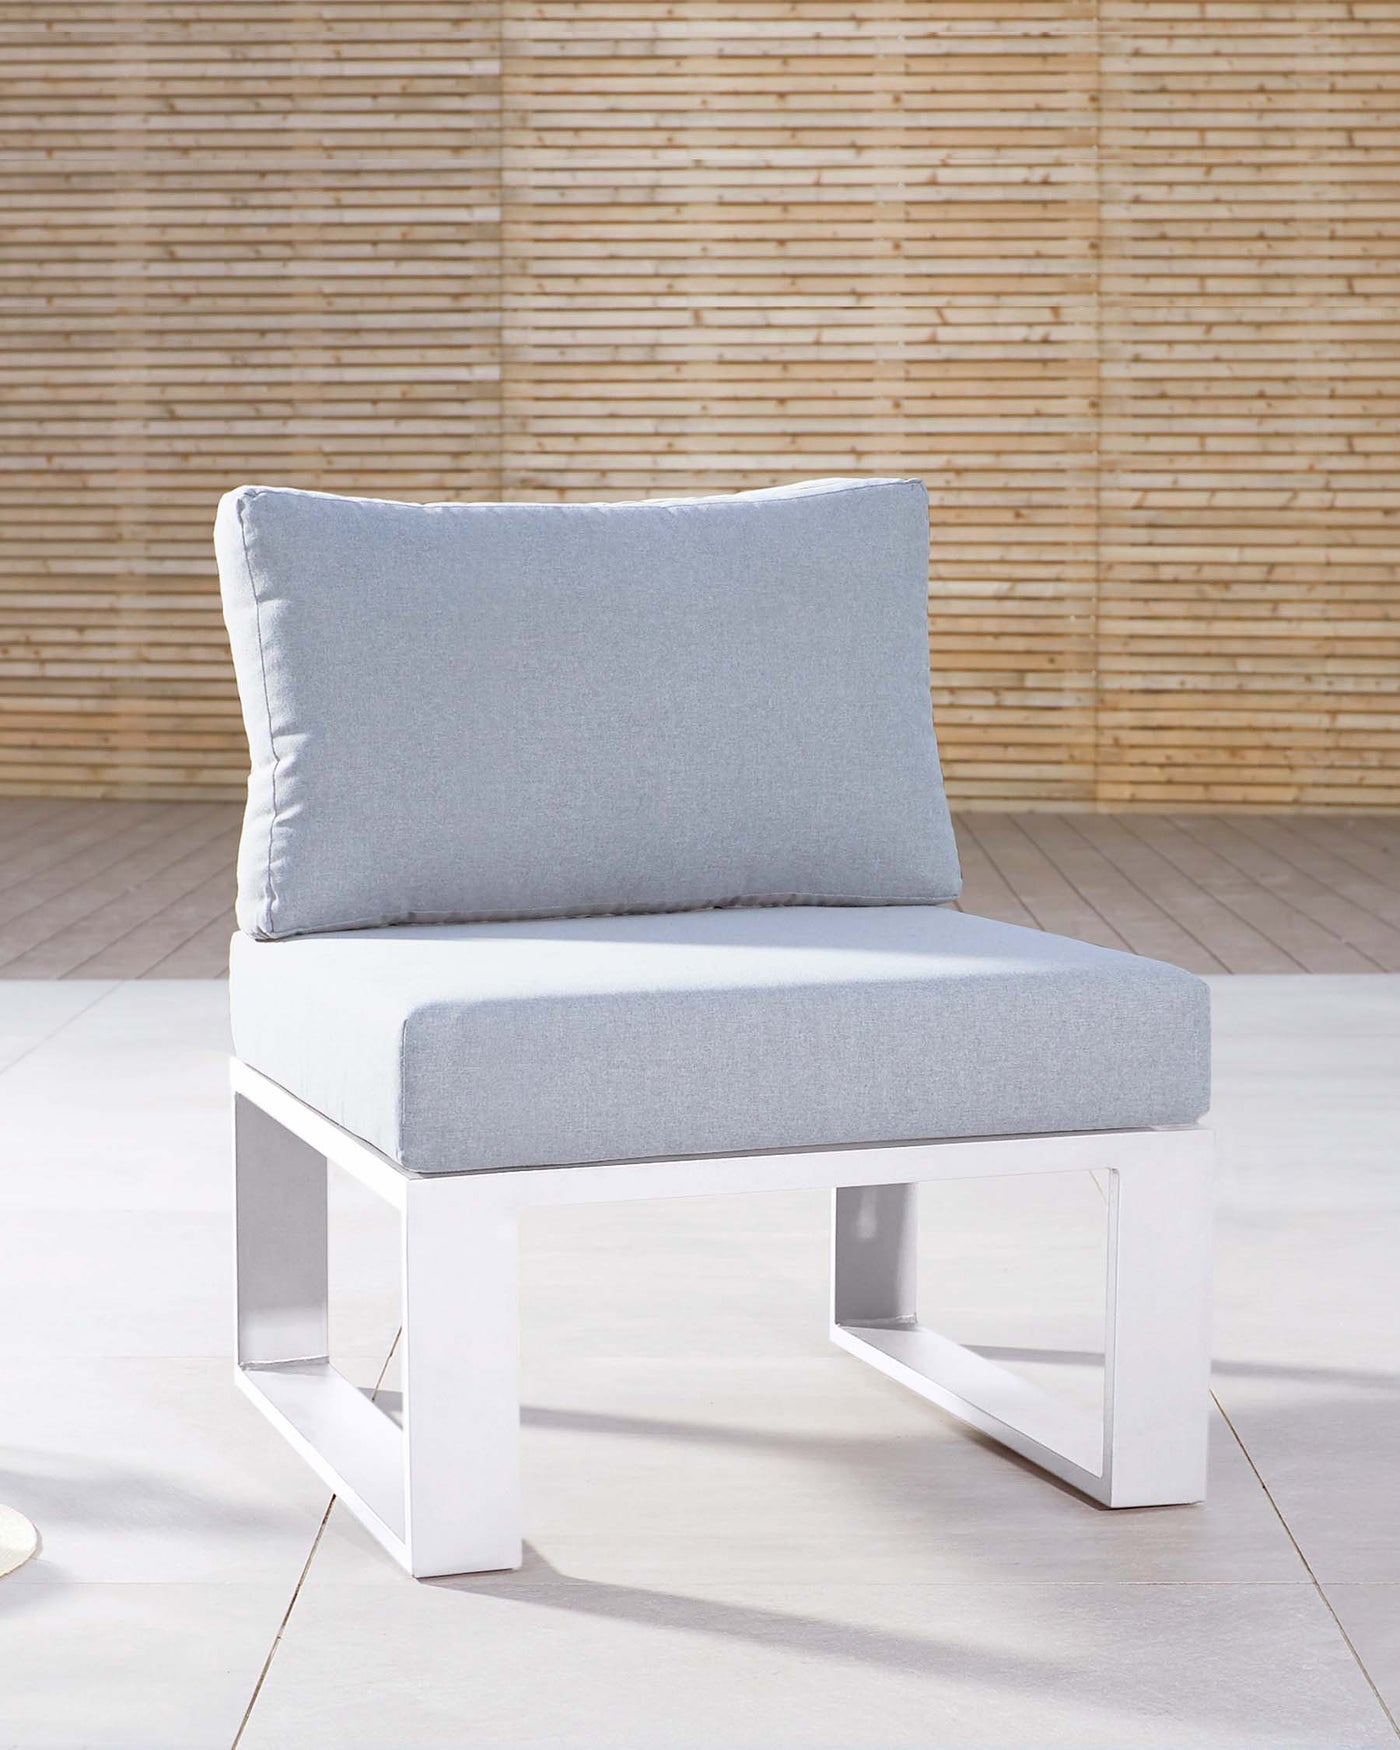 Modern minimalist single-seat modular sofa segment with light grey upholstery and a clean white metal base, positioned against a bamboo wall backdrop.